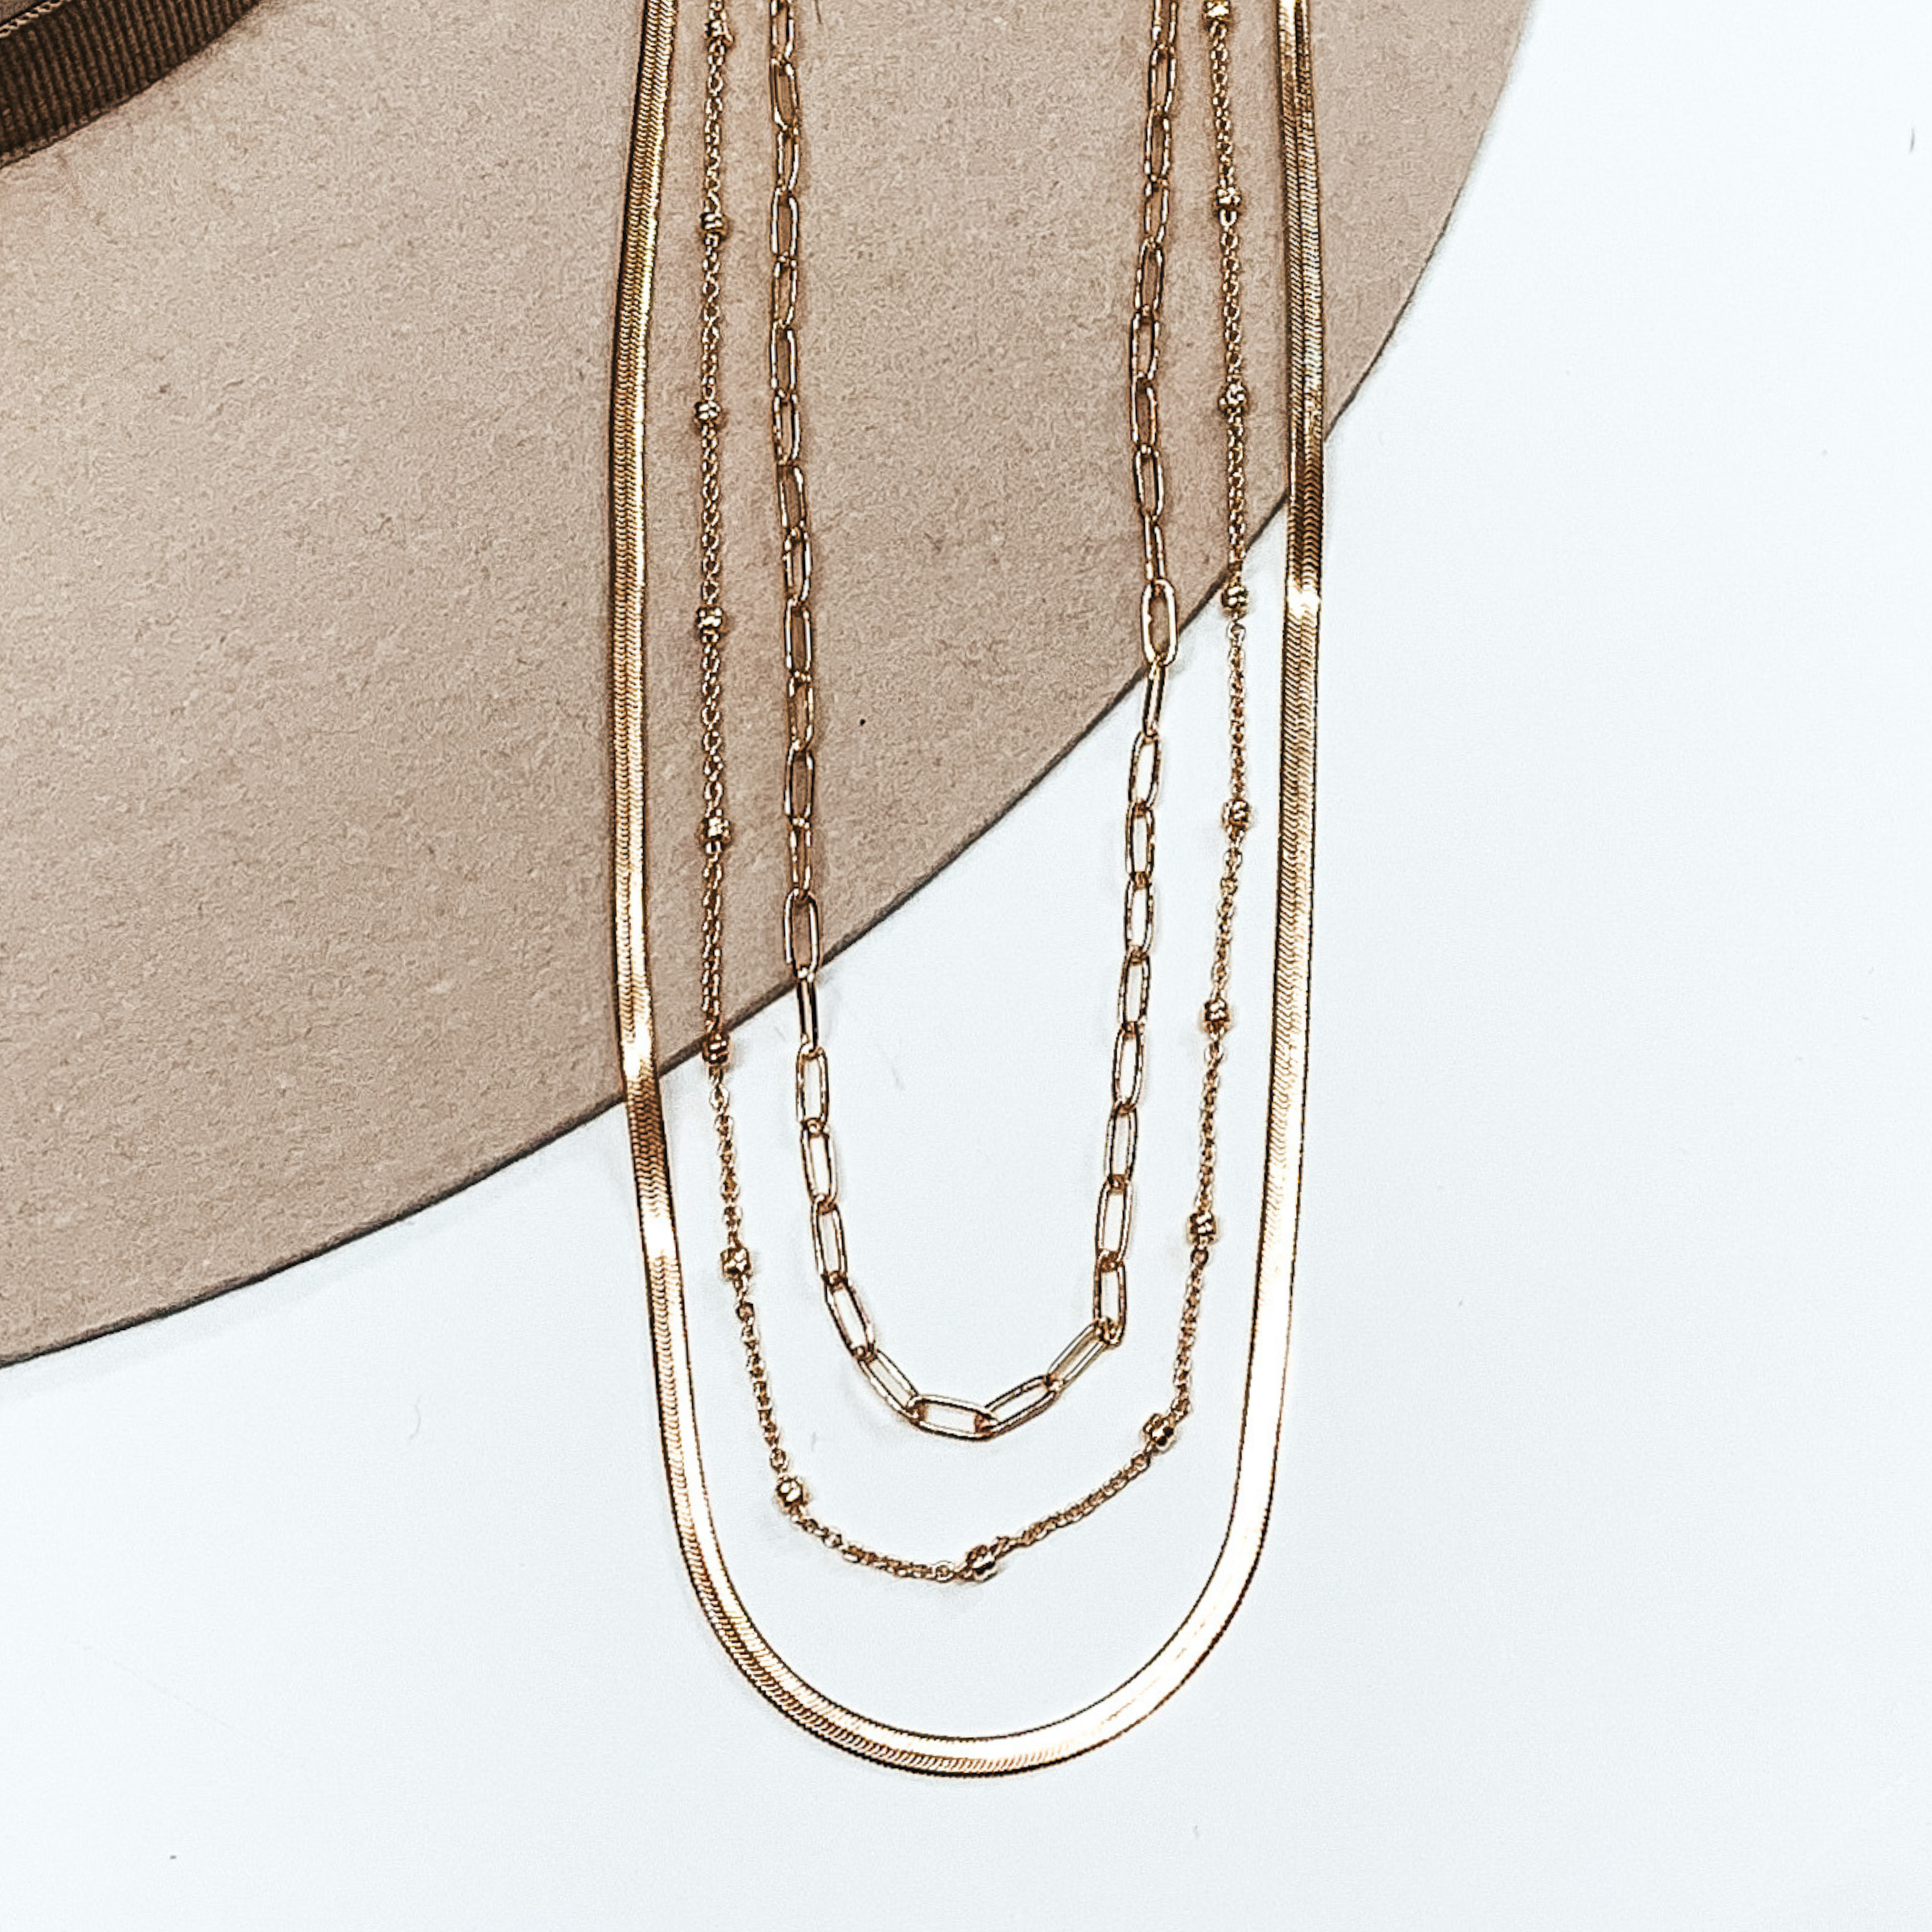 This gold necklace has three different chains. The first one is a classic thin link chain strand, the next one has tiny gold bead spacers, and the last one is a flat herringbone chain. This necklace is pictured on a white and beige background.